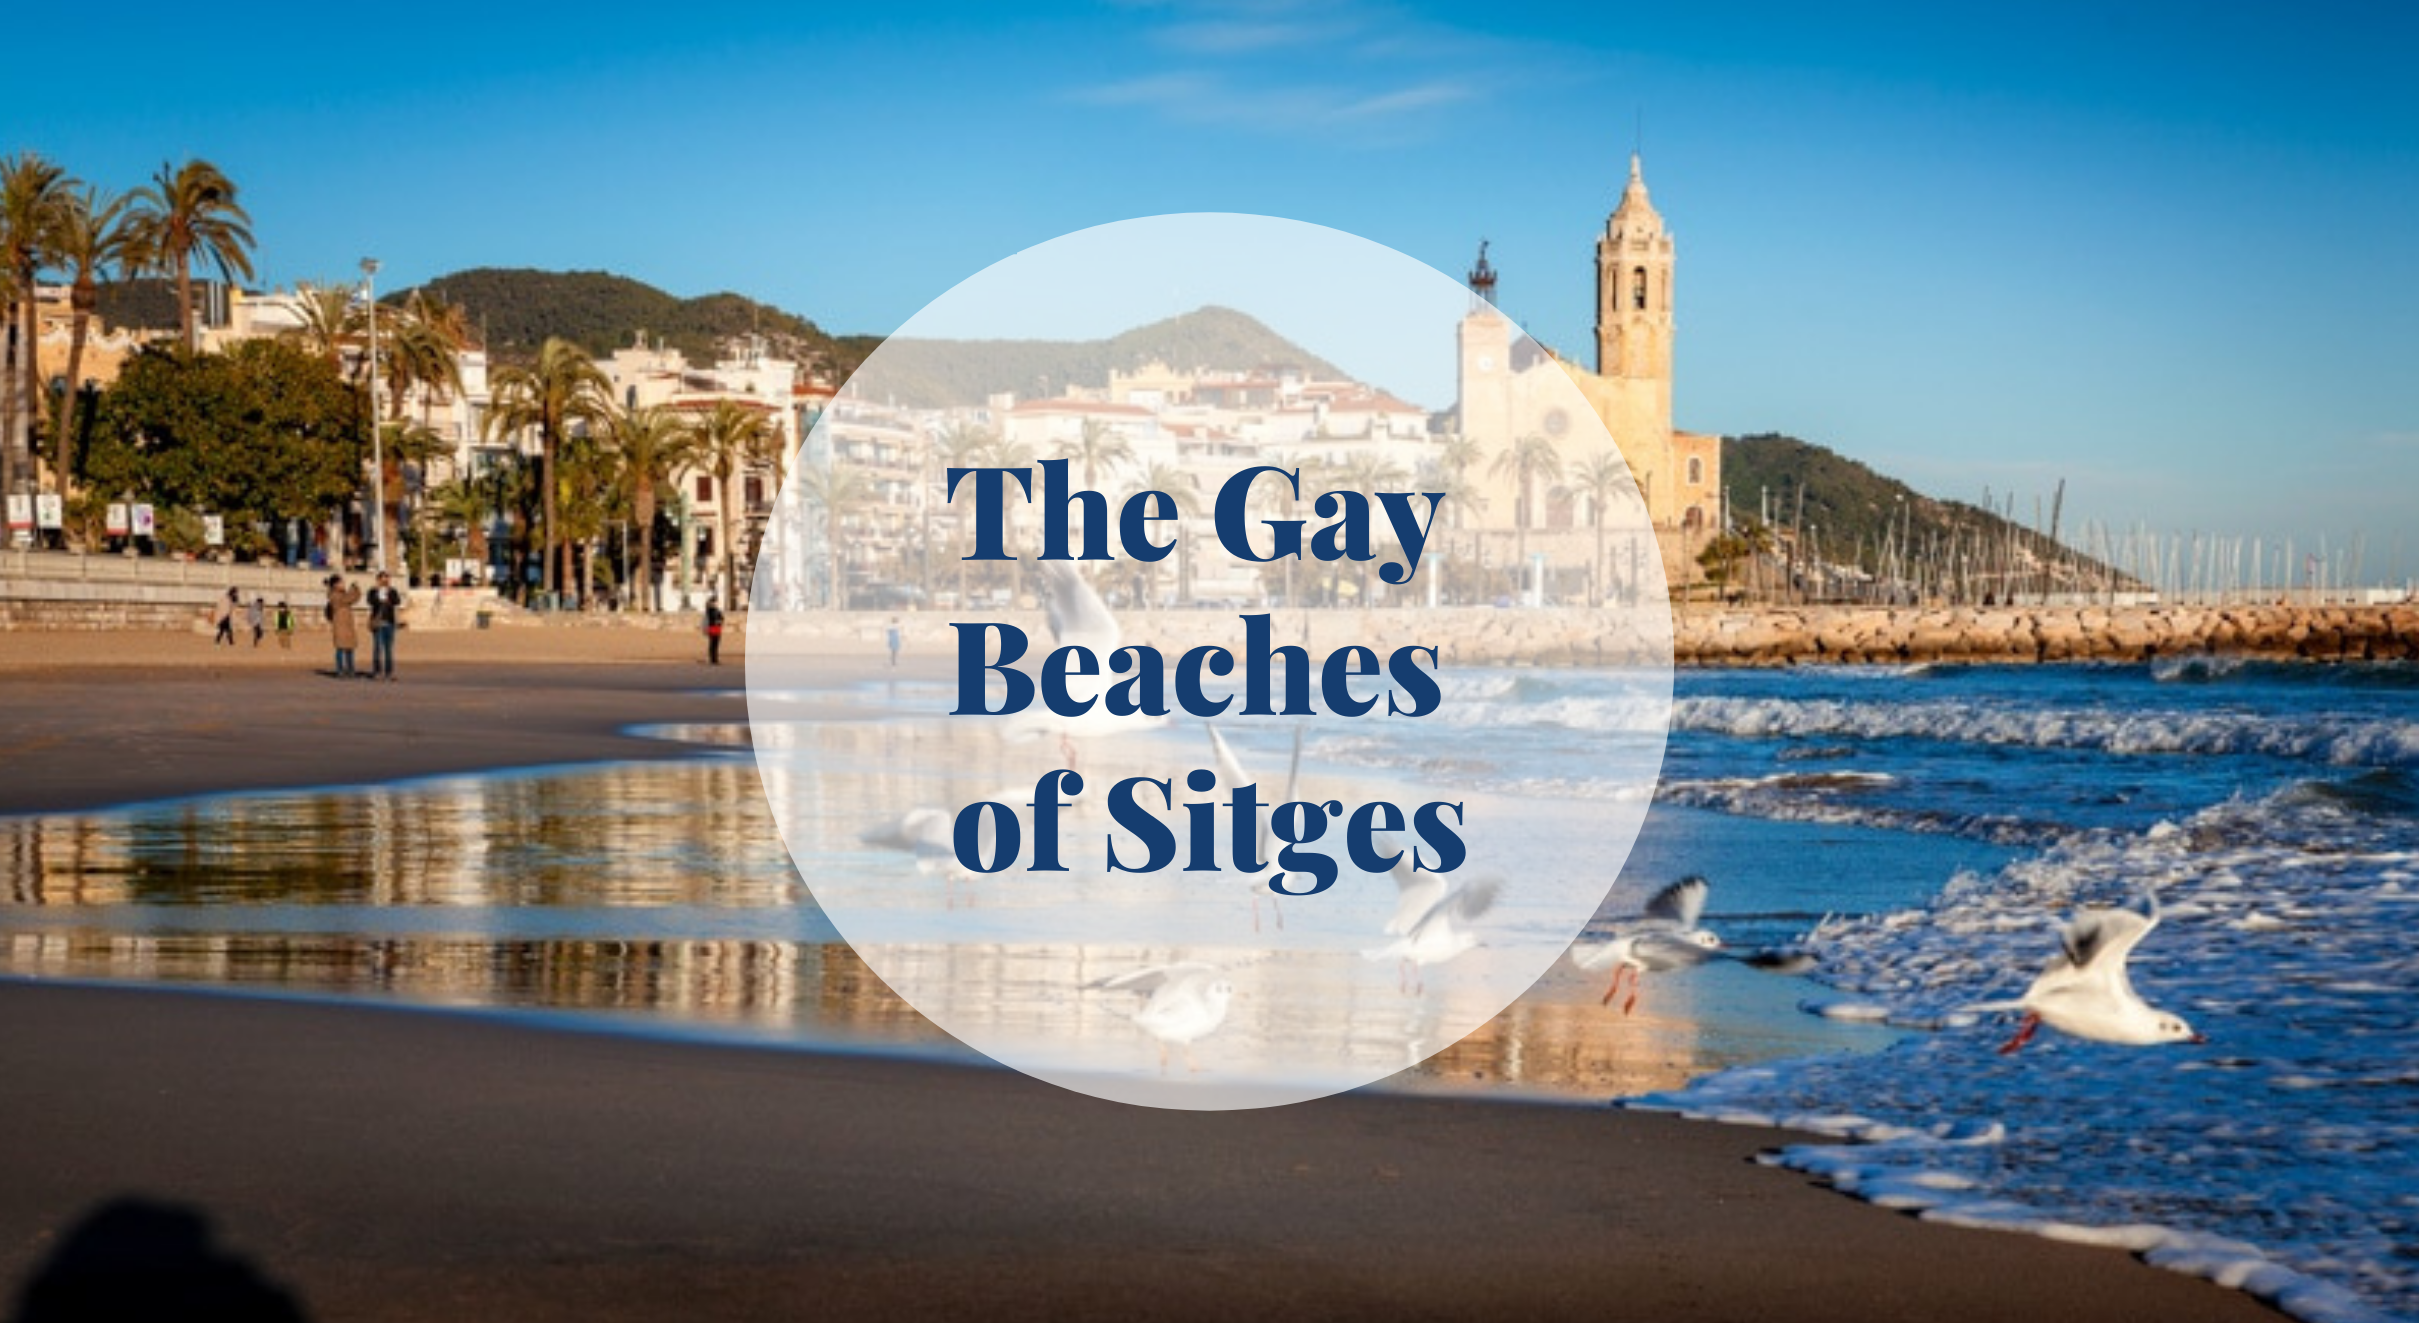 Lets discover the Gay Beaches of Sitges picture